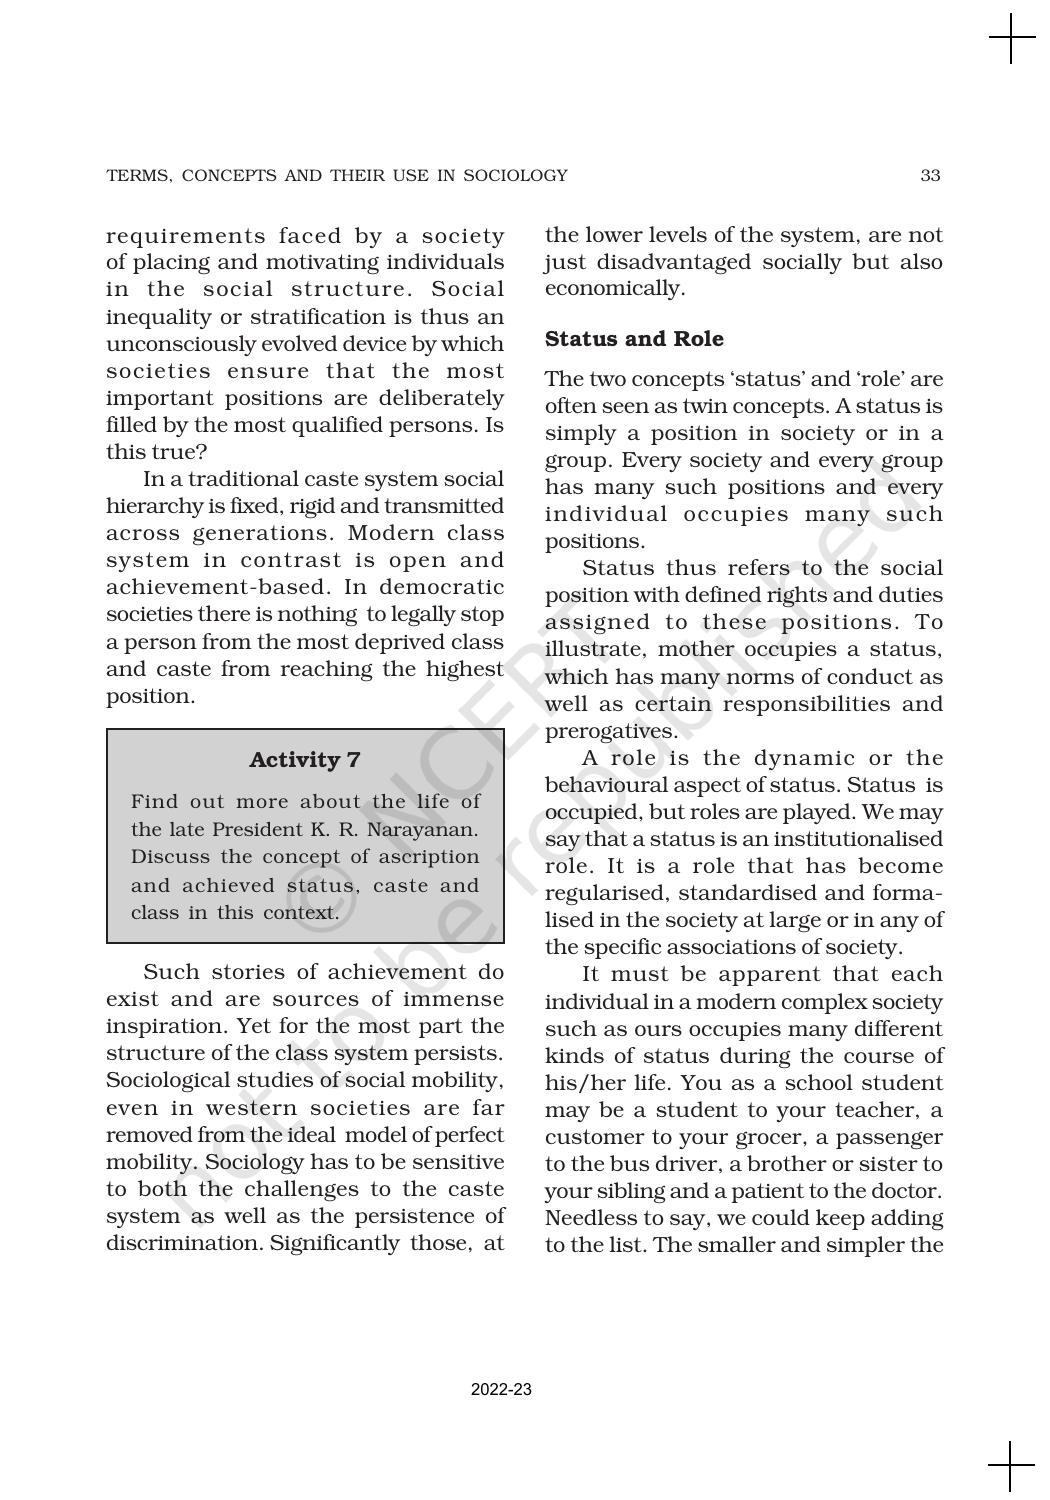 NCERT Book for Class 11 Sociology (Part-I) Chapter 2 Terms, Concepts and Their Use in Sociology - Page 10